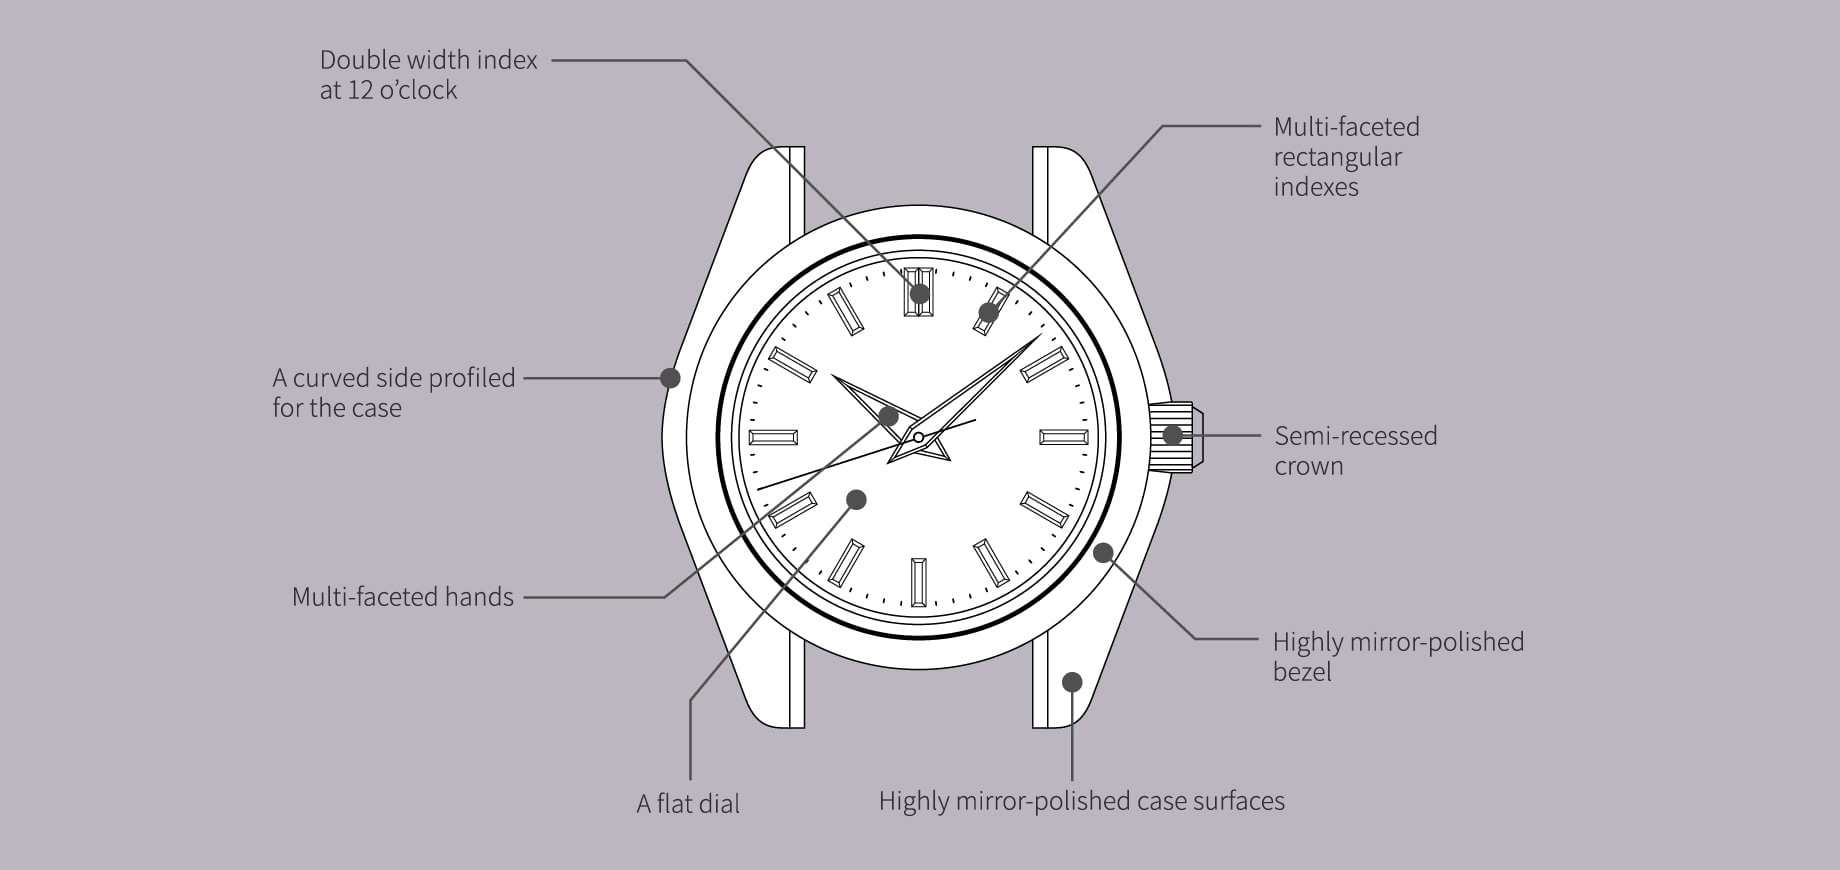 Double width index at 12 o’clock, A curved side profiled for the caseMulti-faceted hands, A flat dial, Highly mirror-polished case surfaces, Highly mirror-polished bezel, Semi-recessed crown, Multi-faceted rectangular indexes